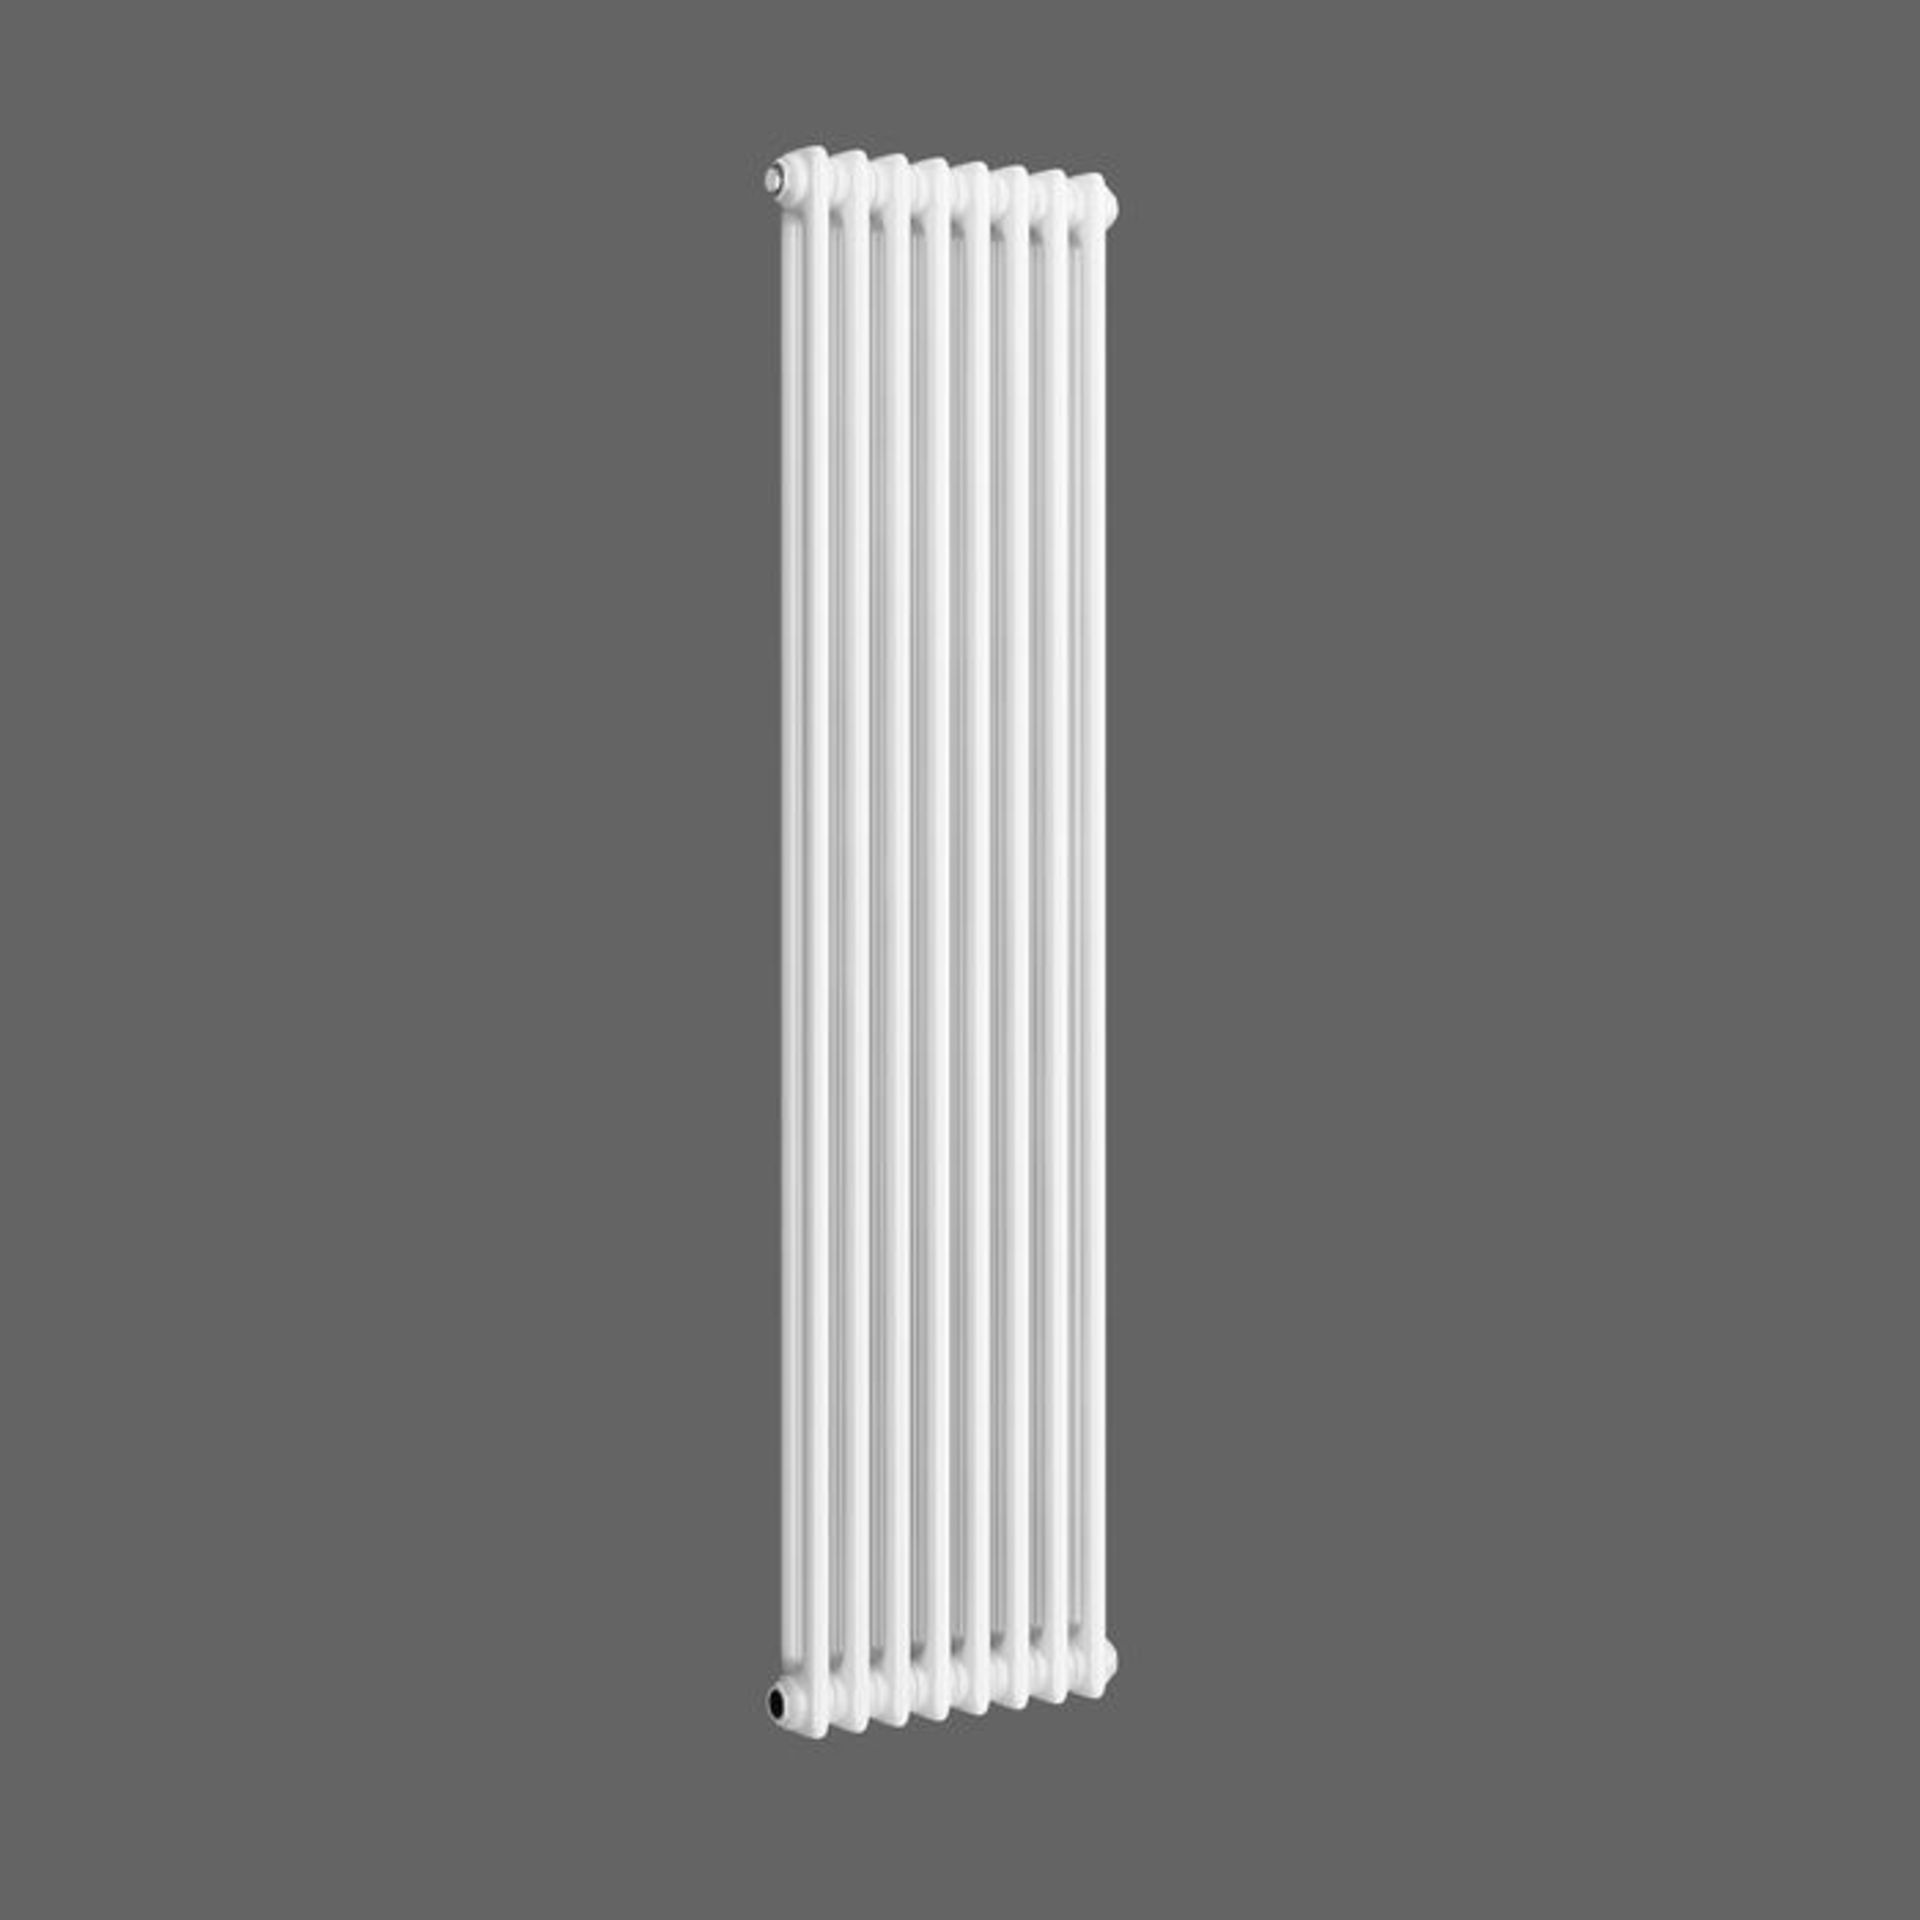 (DK126) 1500x380mm White Double Panel Vertical Colosseum Traditional Radiator. RRP £369.99. Made - Image 4 of 4